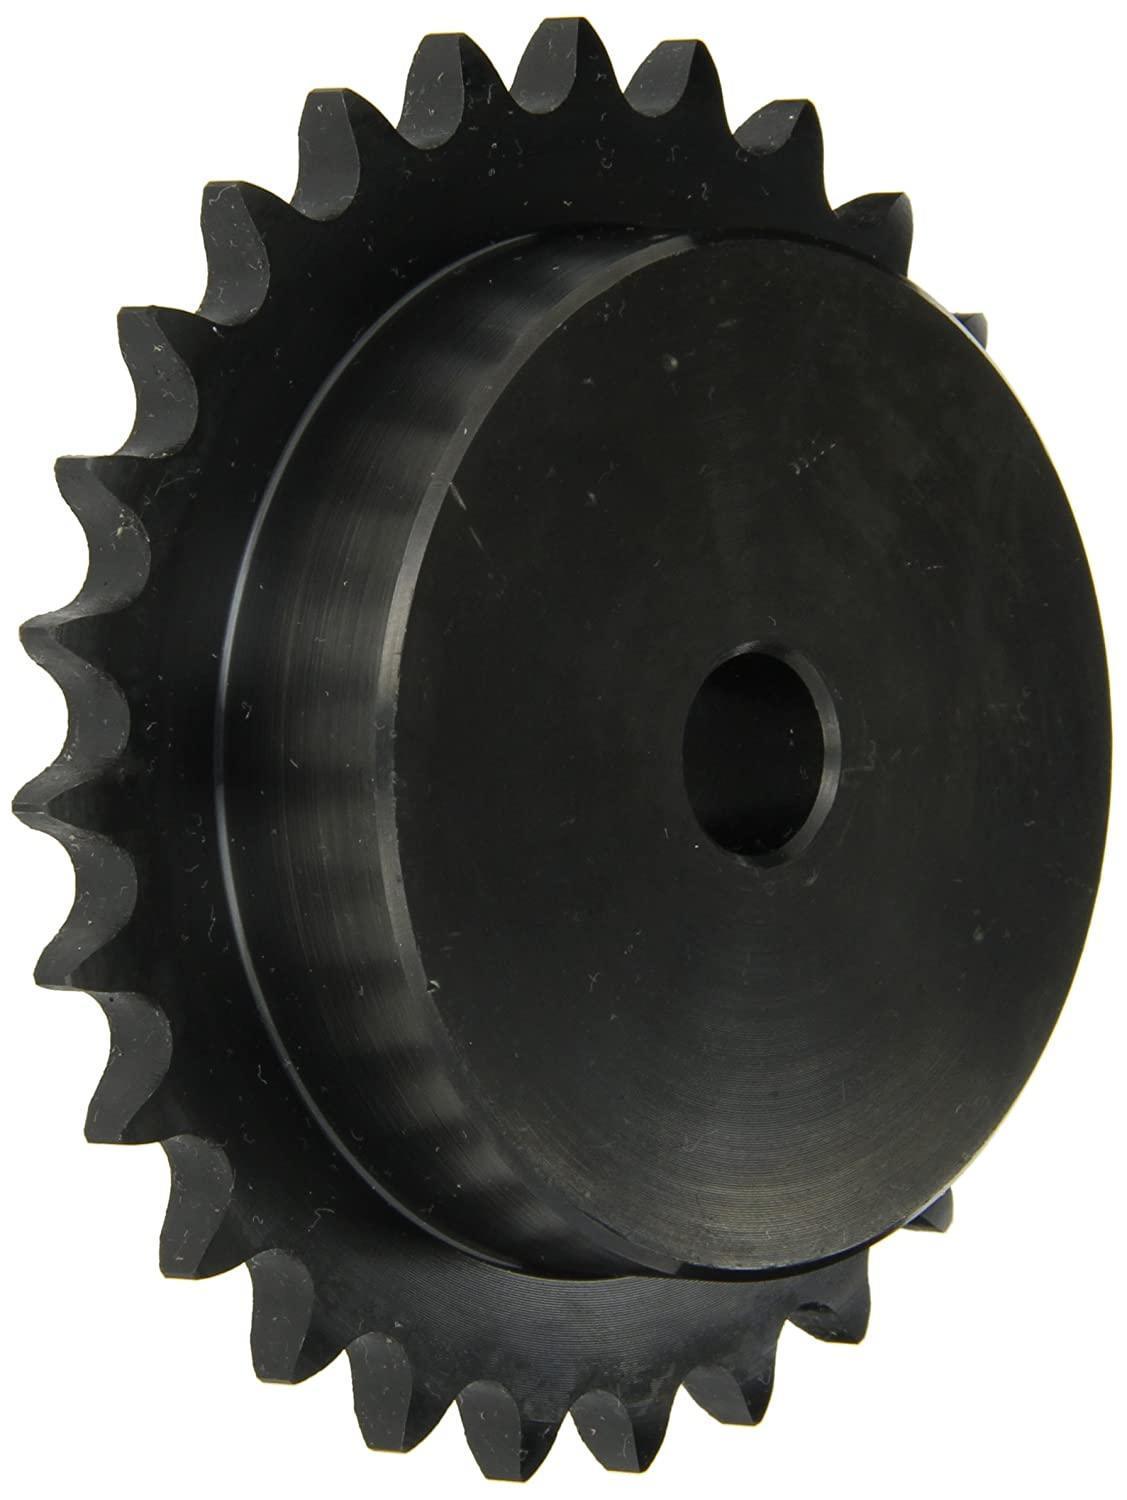 120B45 Roller Chain Sprocket With Stock Bore - Forces Inc